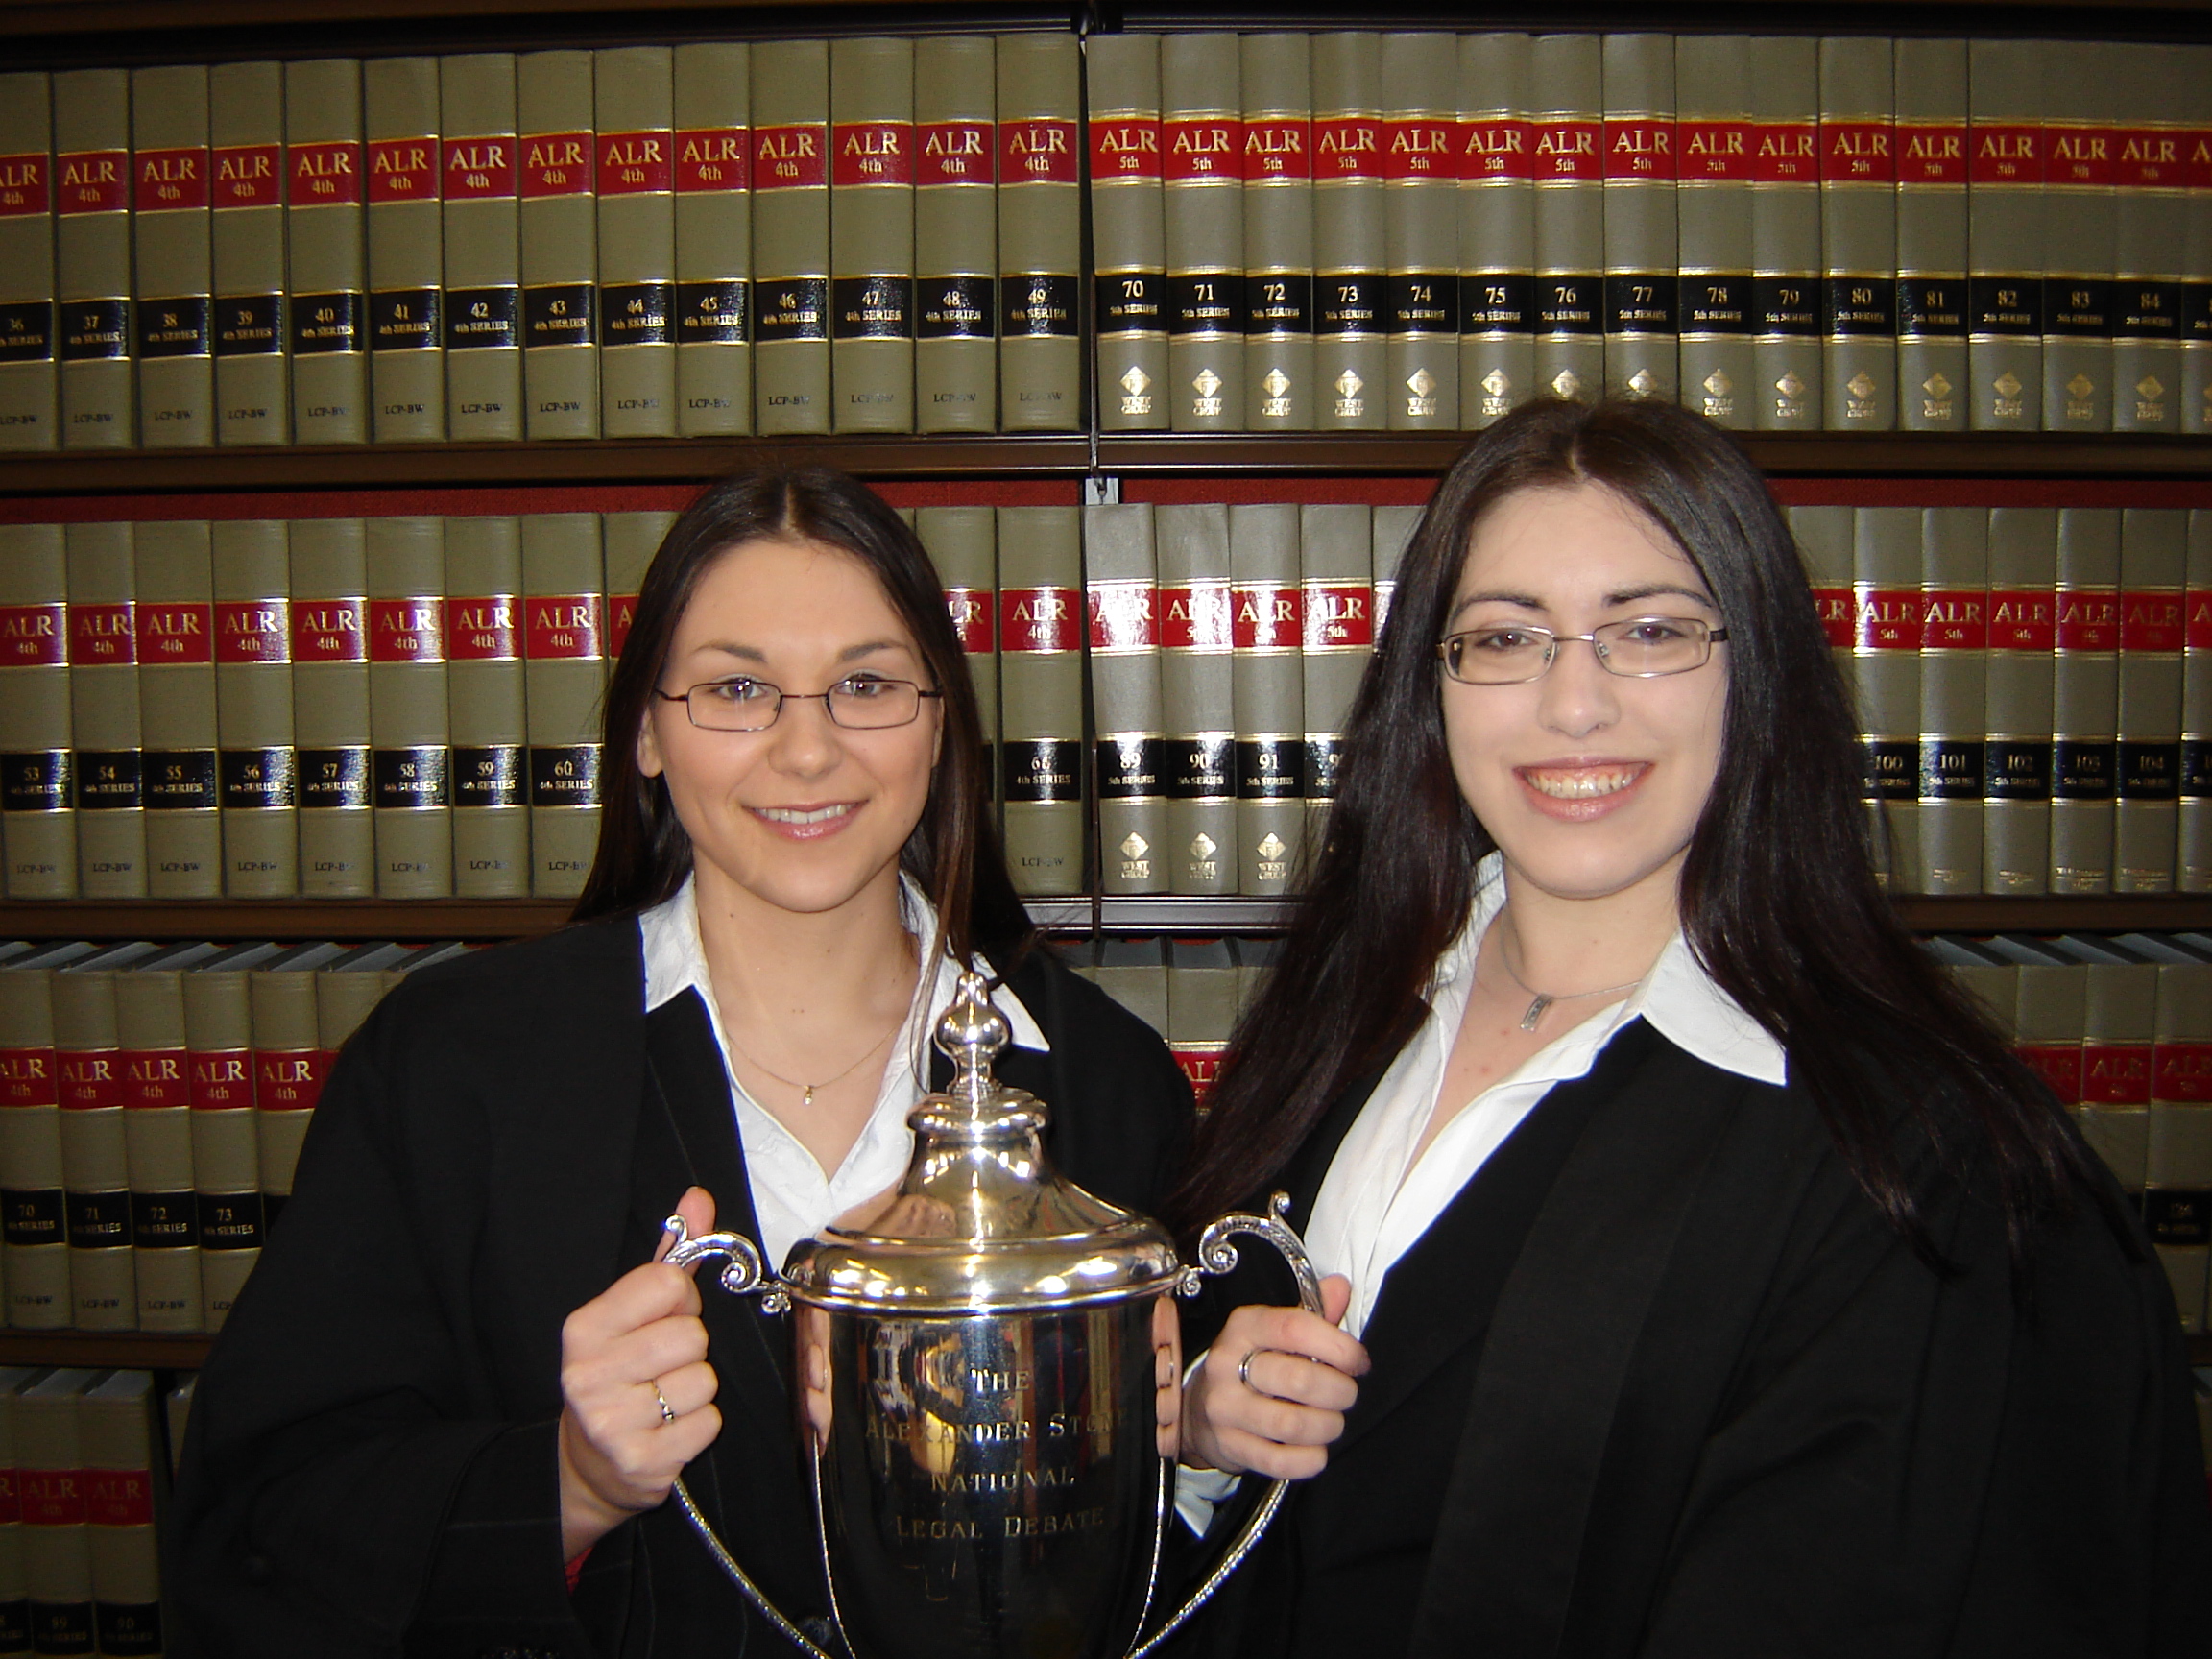 a picture of the winnng students from the mooting competition